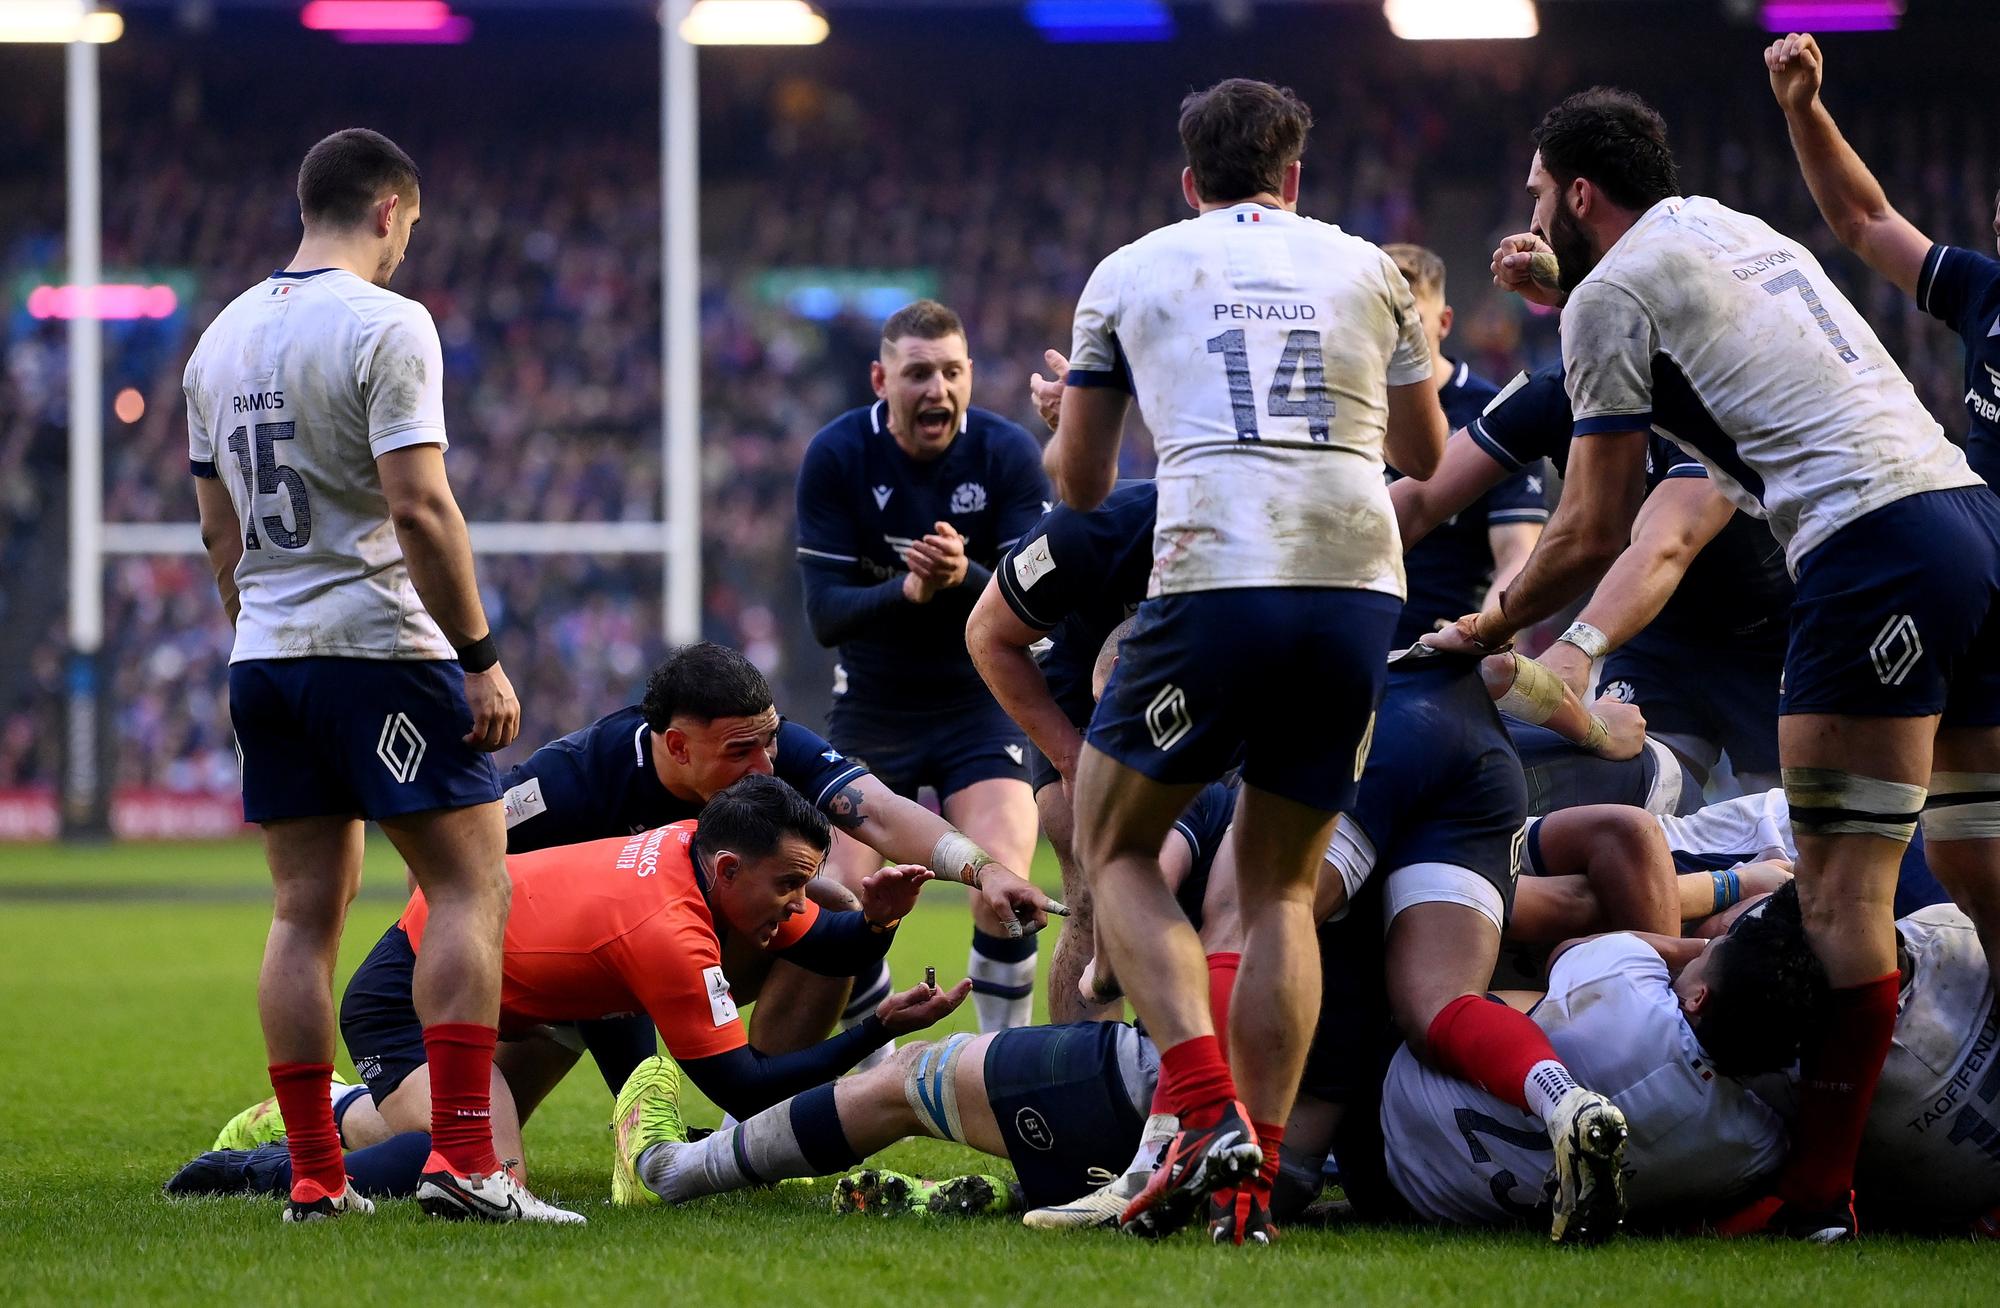 scotland boss gregor townsend fumes at tmo six nations drama - 'we believe it was a try'